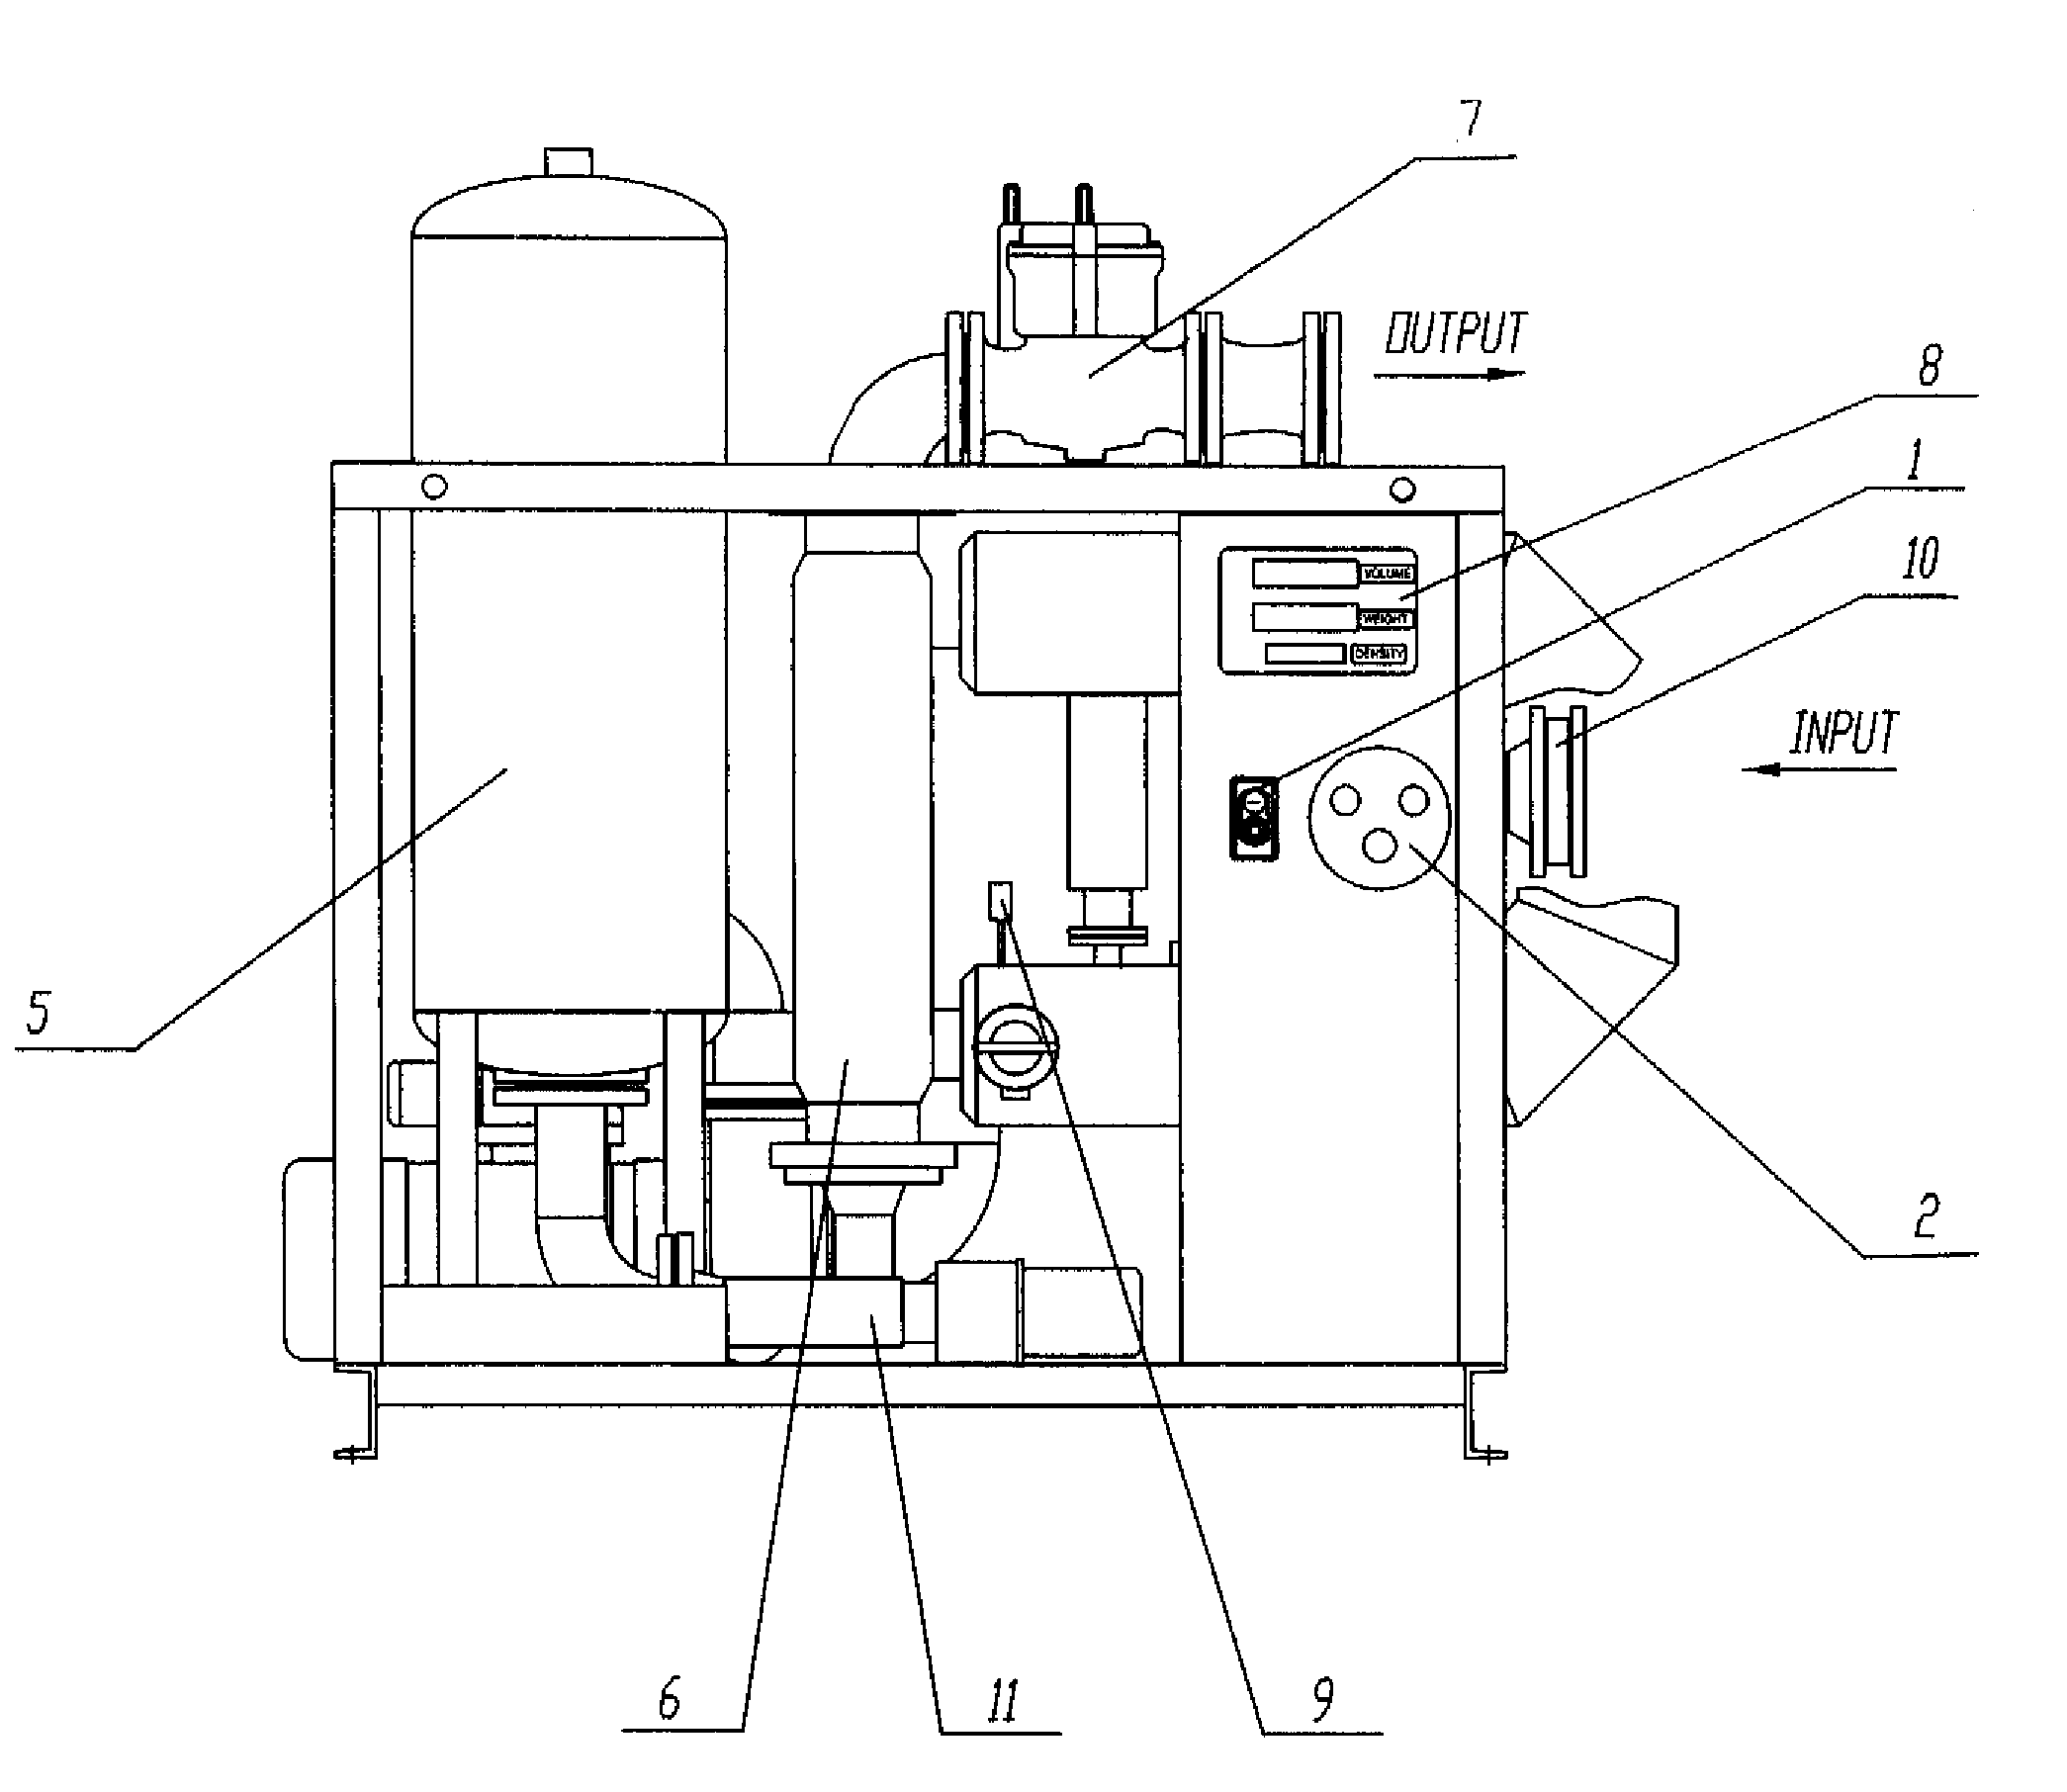 Apparatus for Measurement of Liquid Oil Products